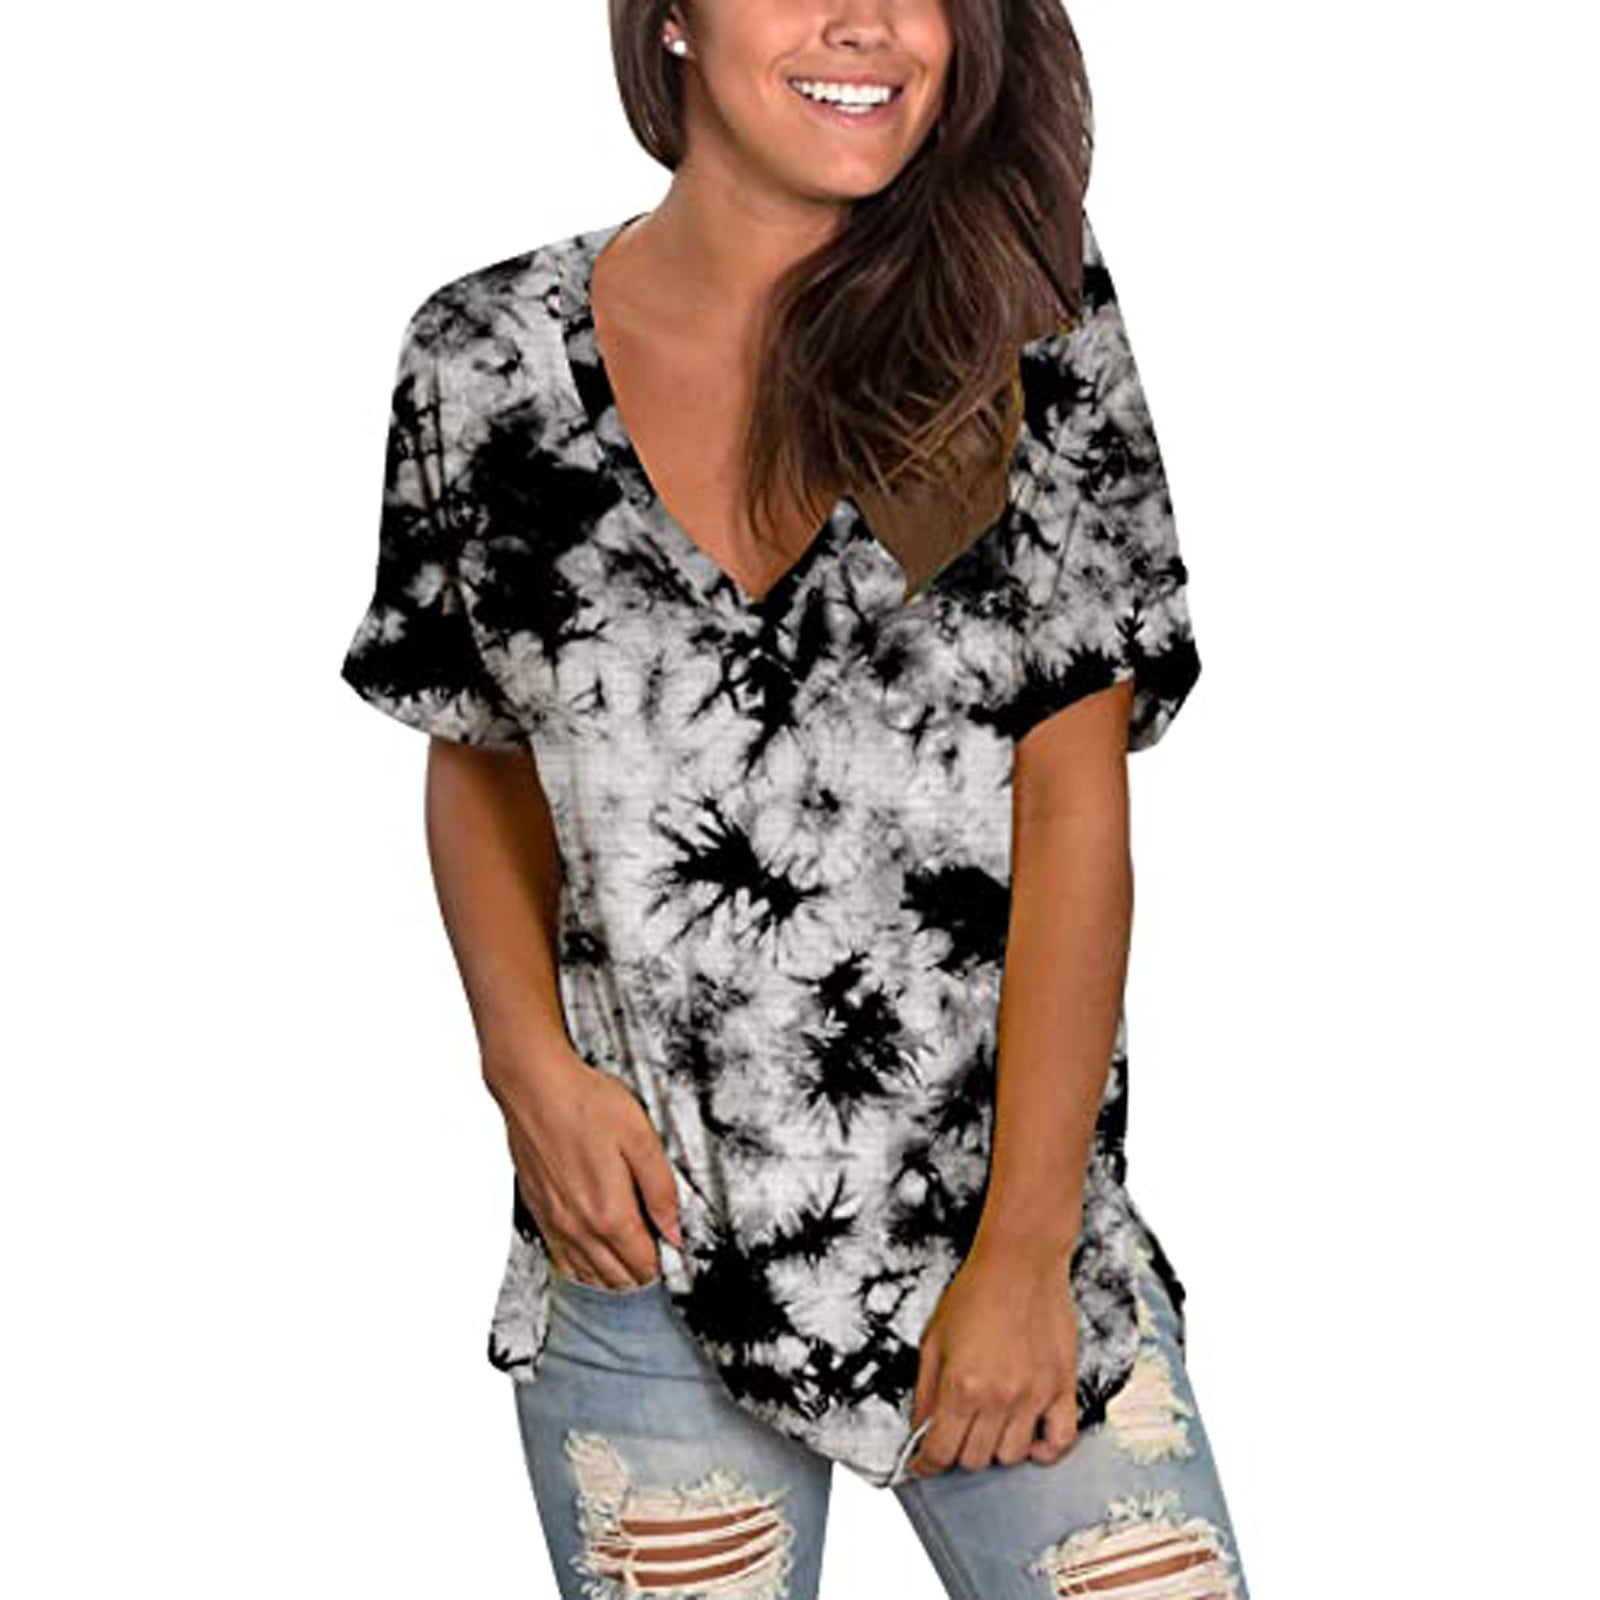 Shirts for Women,Womens Tie Dye Short Sleeve Shirts for Womens V Neck Graphic Printed Tee Casual Summer Tops 